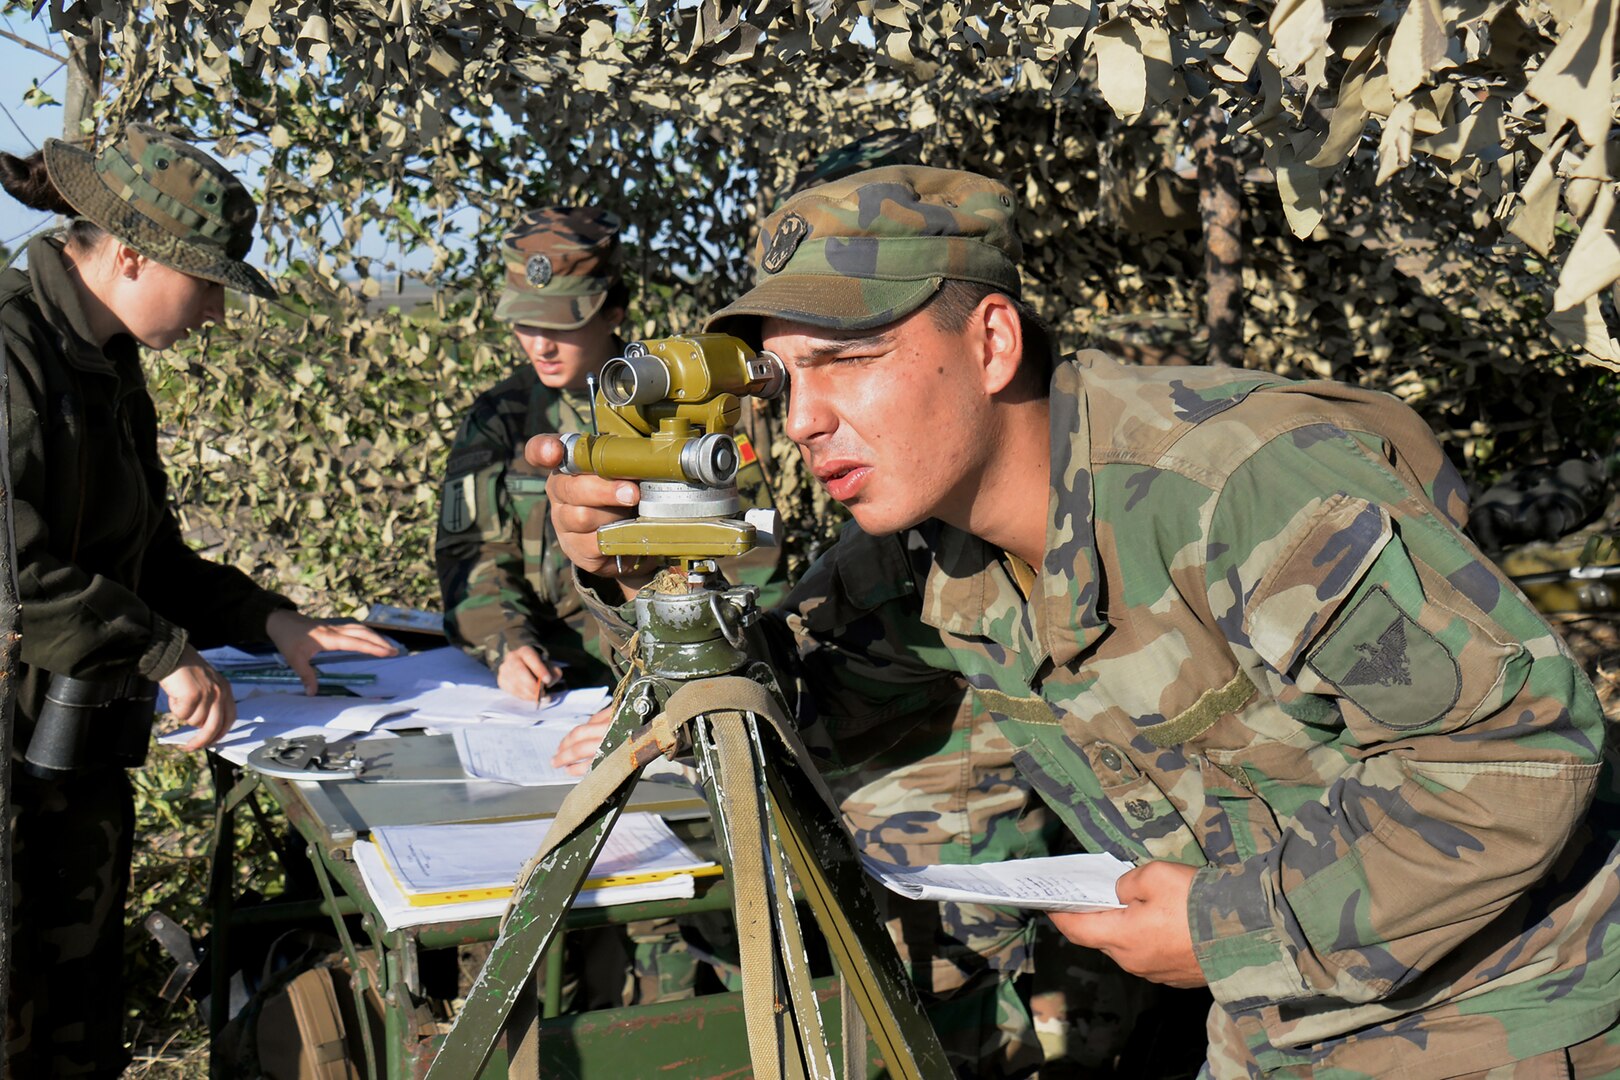 Moldovan Artillery soldiers prepare a fire mission during Operation Fire Shield 2019 hosted by Moldova Sept. 12, 2019, at Bulboaca Training Area, Moldova.   Fire Shield’s mission is sharing knowledge and best practices among the North Carolina and Alabama National Guard artillery experts, Moldovan soldiers and officers and other nations attending the annual event. The NCNG has teamed with Moldova for more than two decades via the State Partnership Program designed to increase peace and stability across Europe.